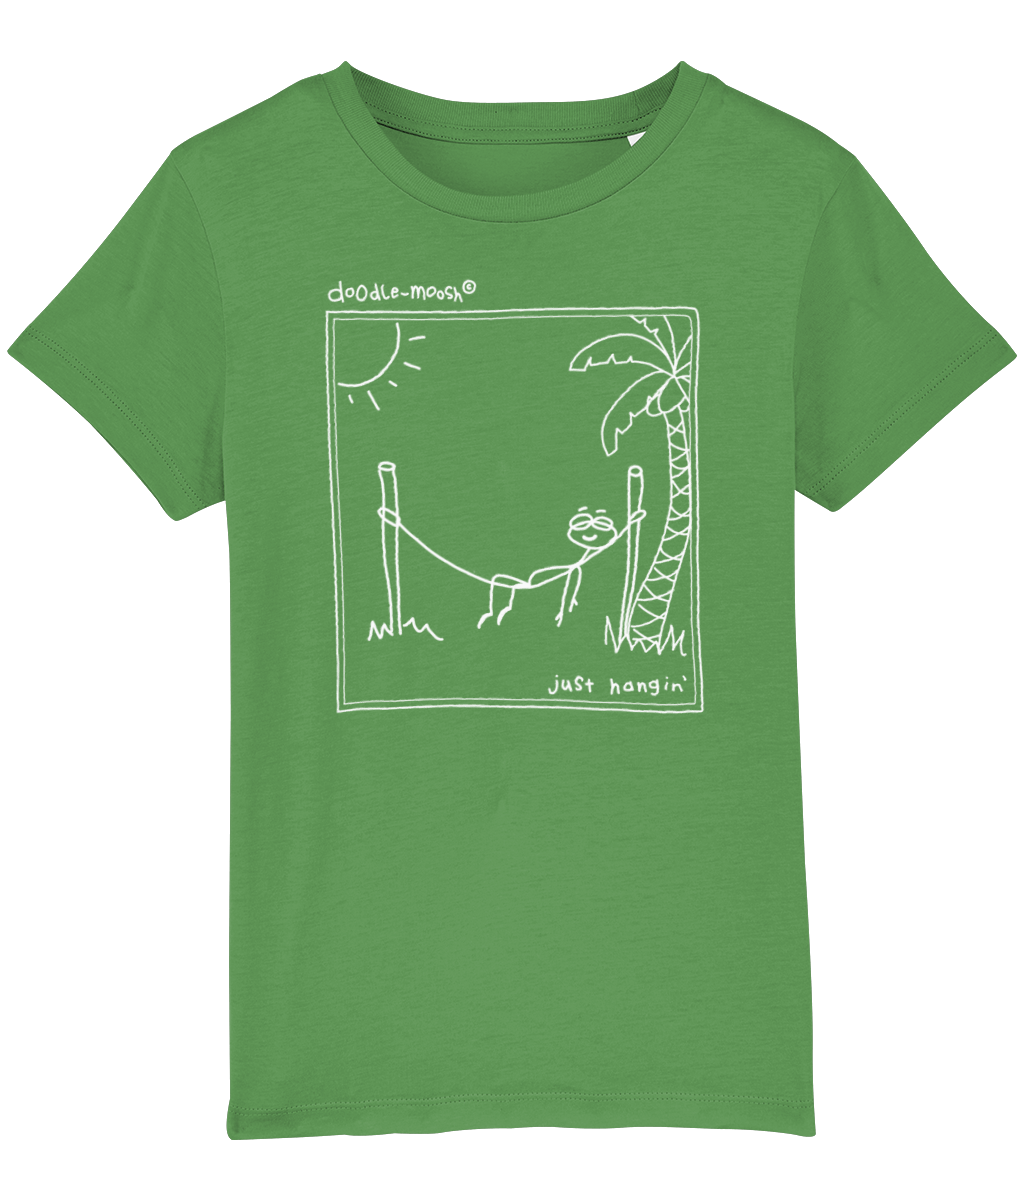 Just hanging t-shirt, green with white